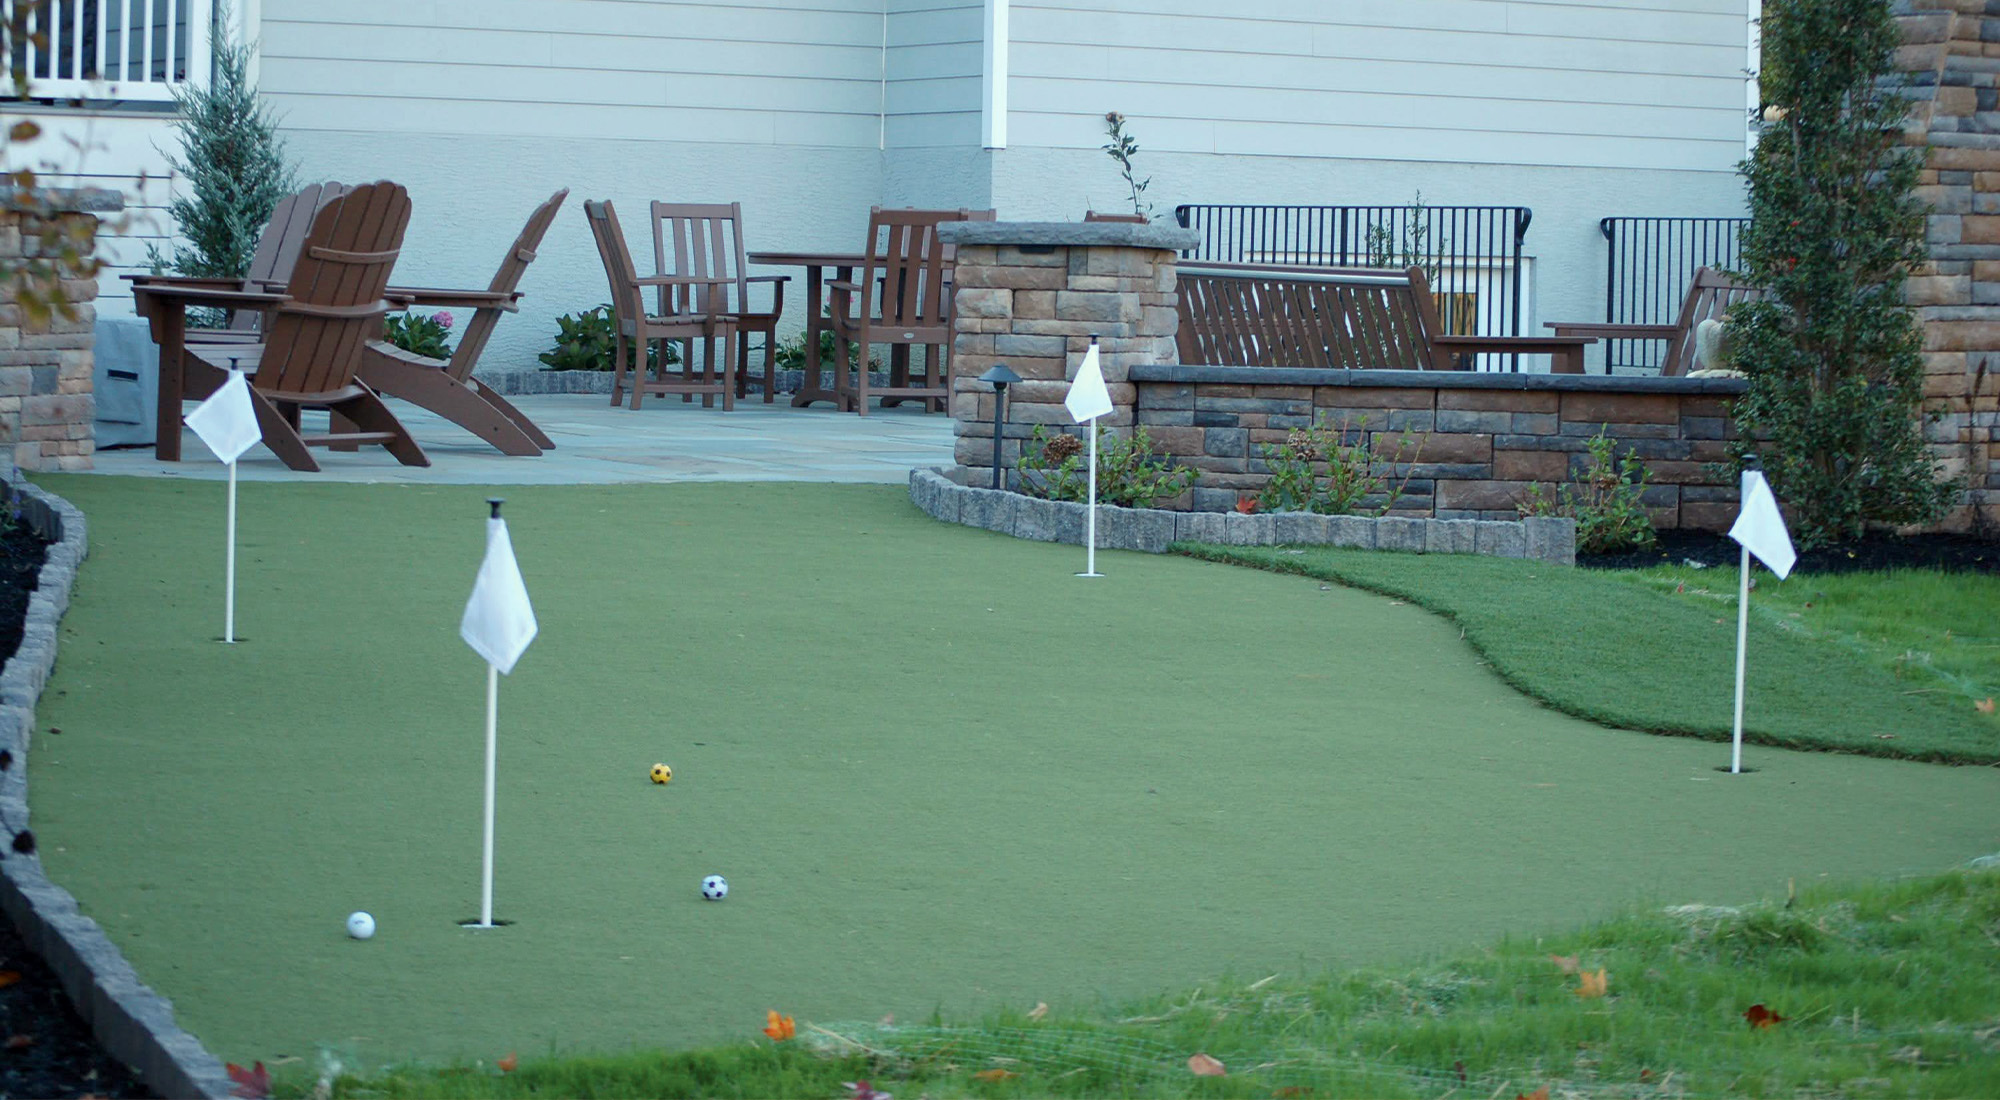 Artificial turf putting green in a backyard from CKC Landscaping